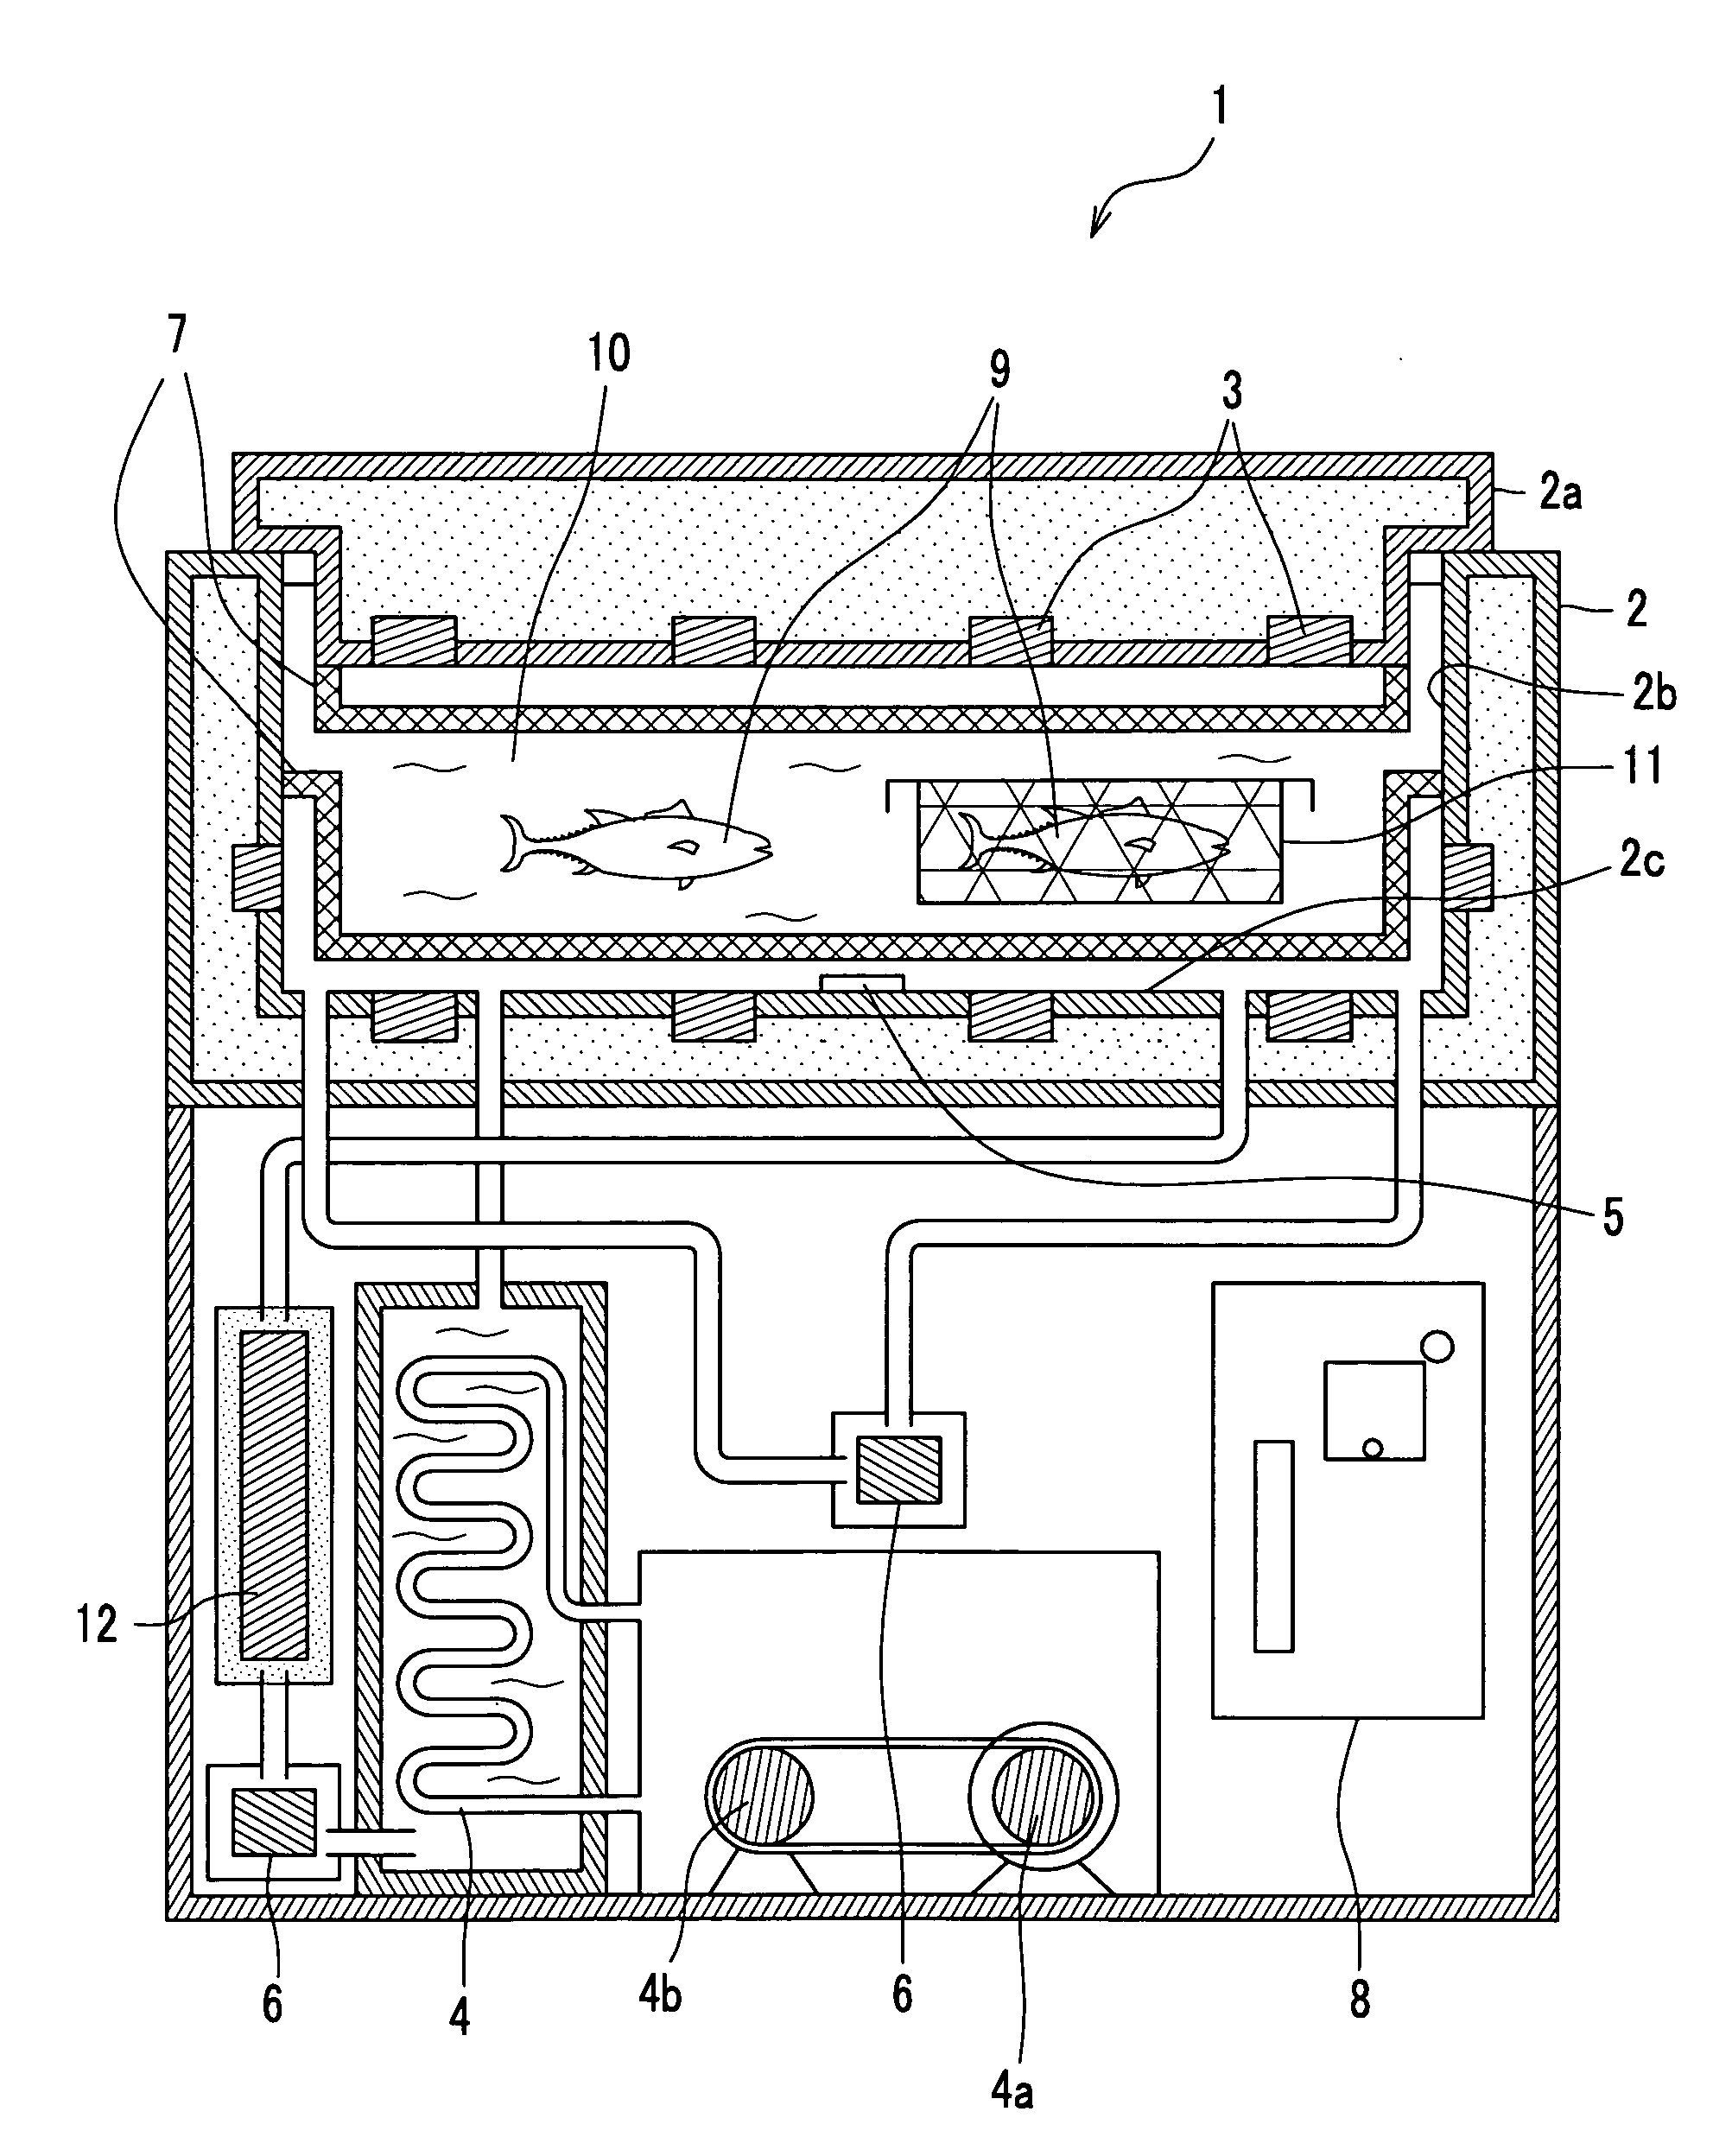 Apparatus for cooling food under water and maintaining water temperature therefor